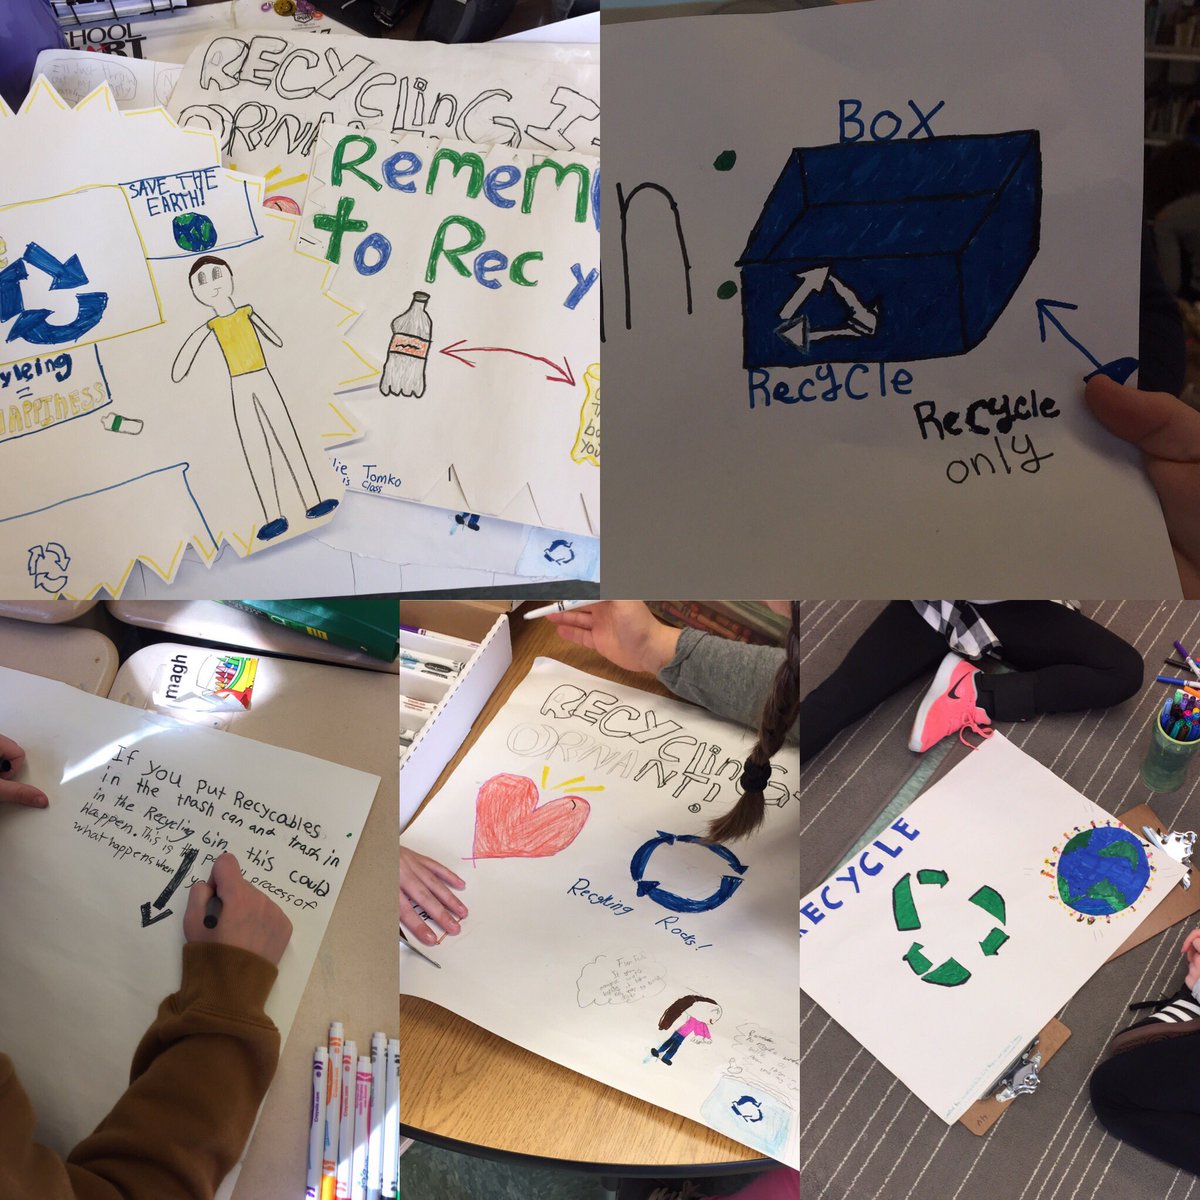 Making recycling posters! #pepsicorecycling